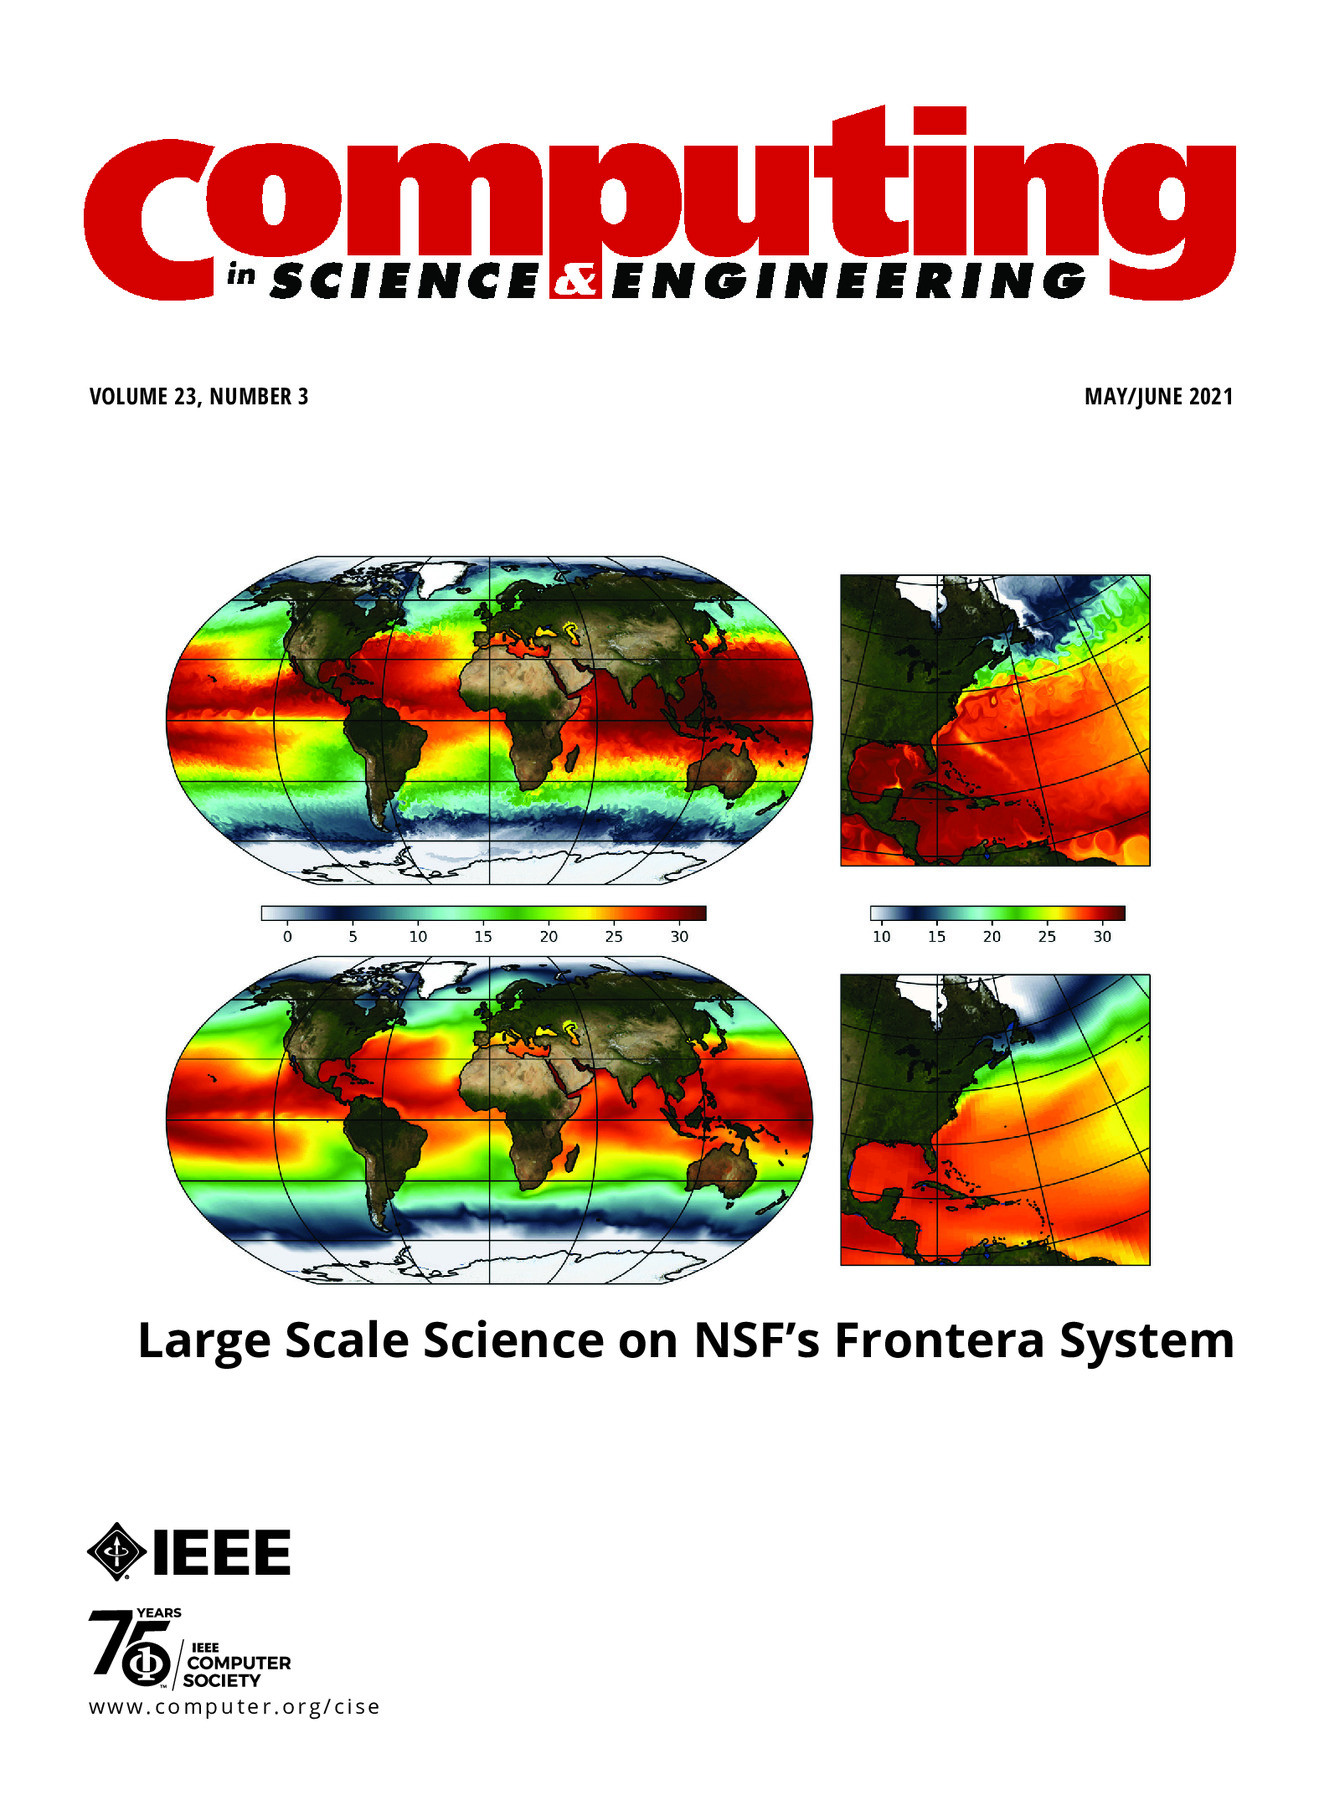 Computing in Science and Engineering May/June 2021 Vol. 23 No. 3